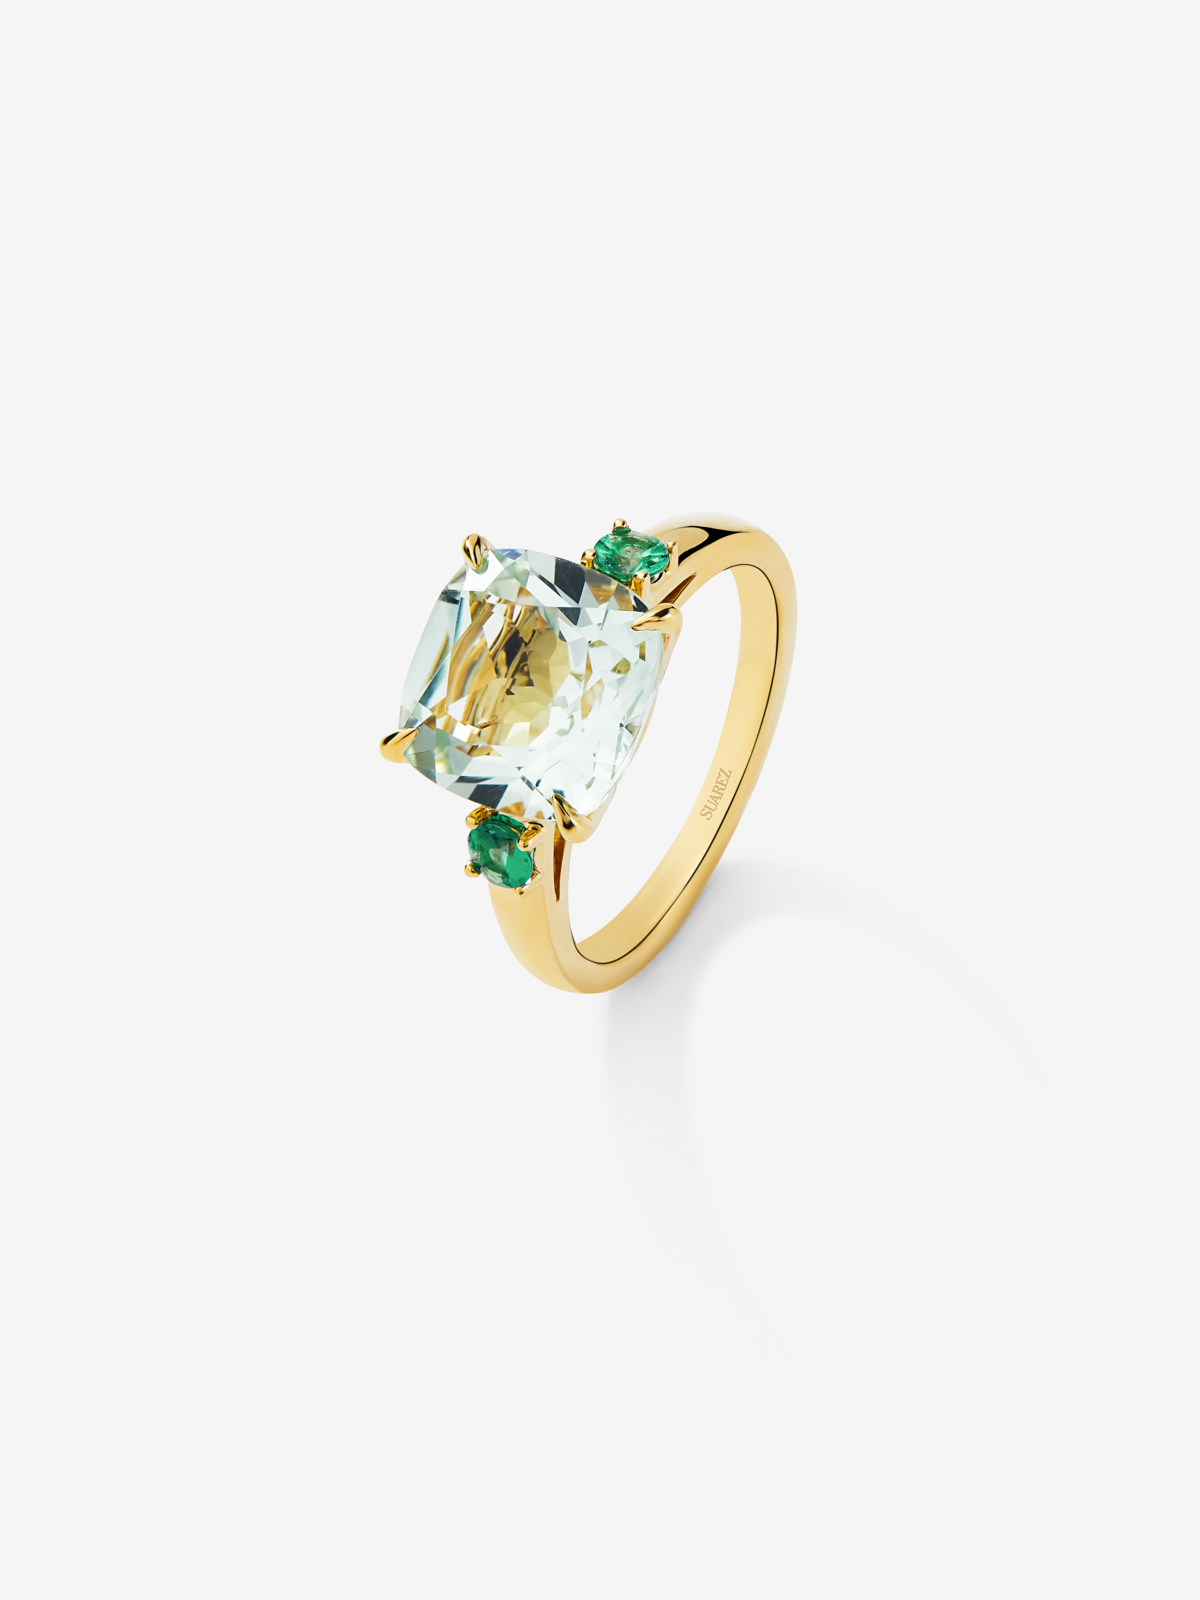 18k yellow golden ring with green amethyst in 3.95 cts and green -emeralds in bright 0.25 cts